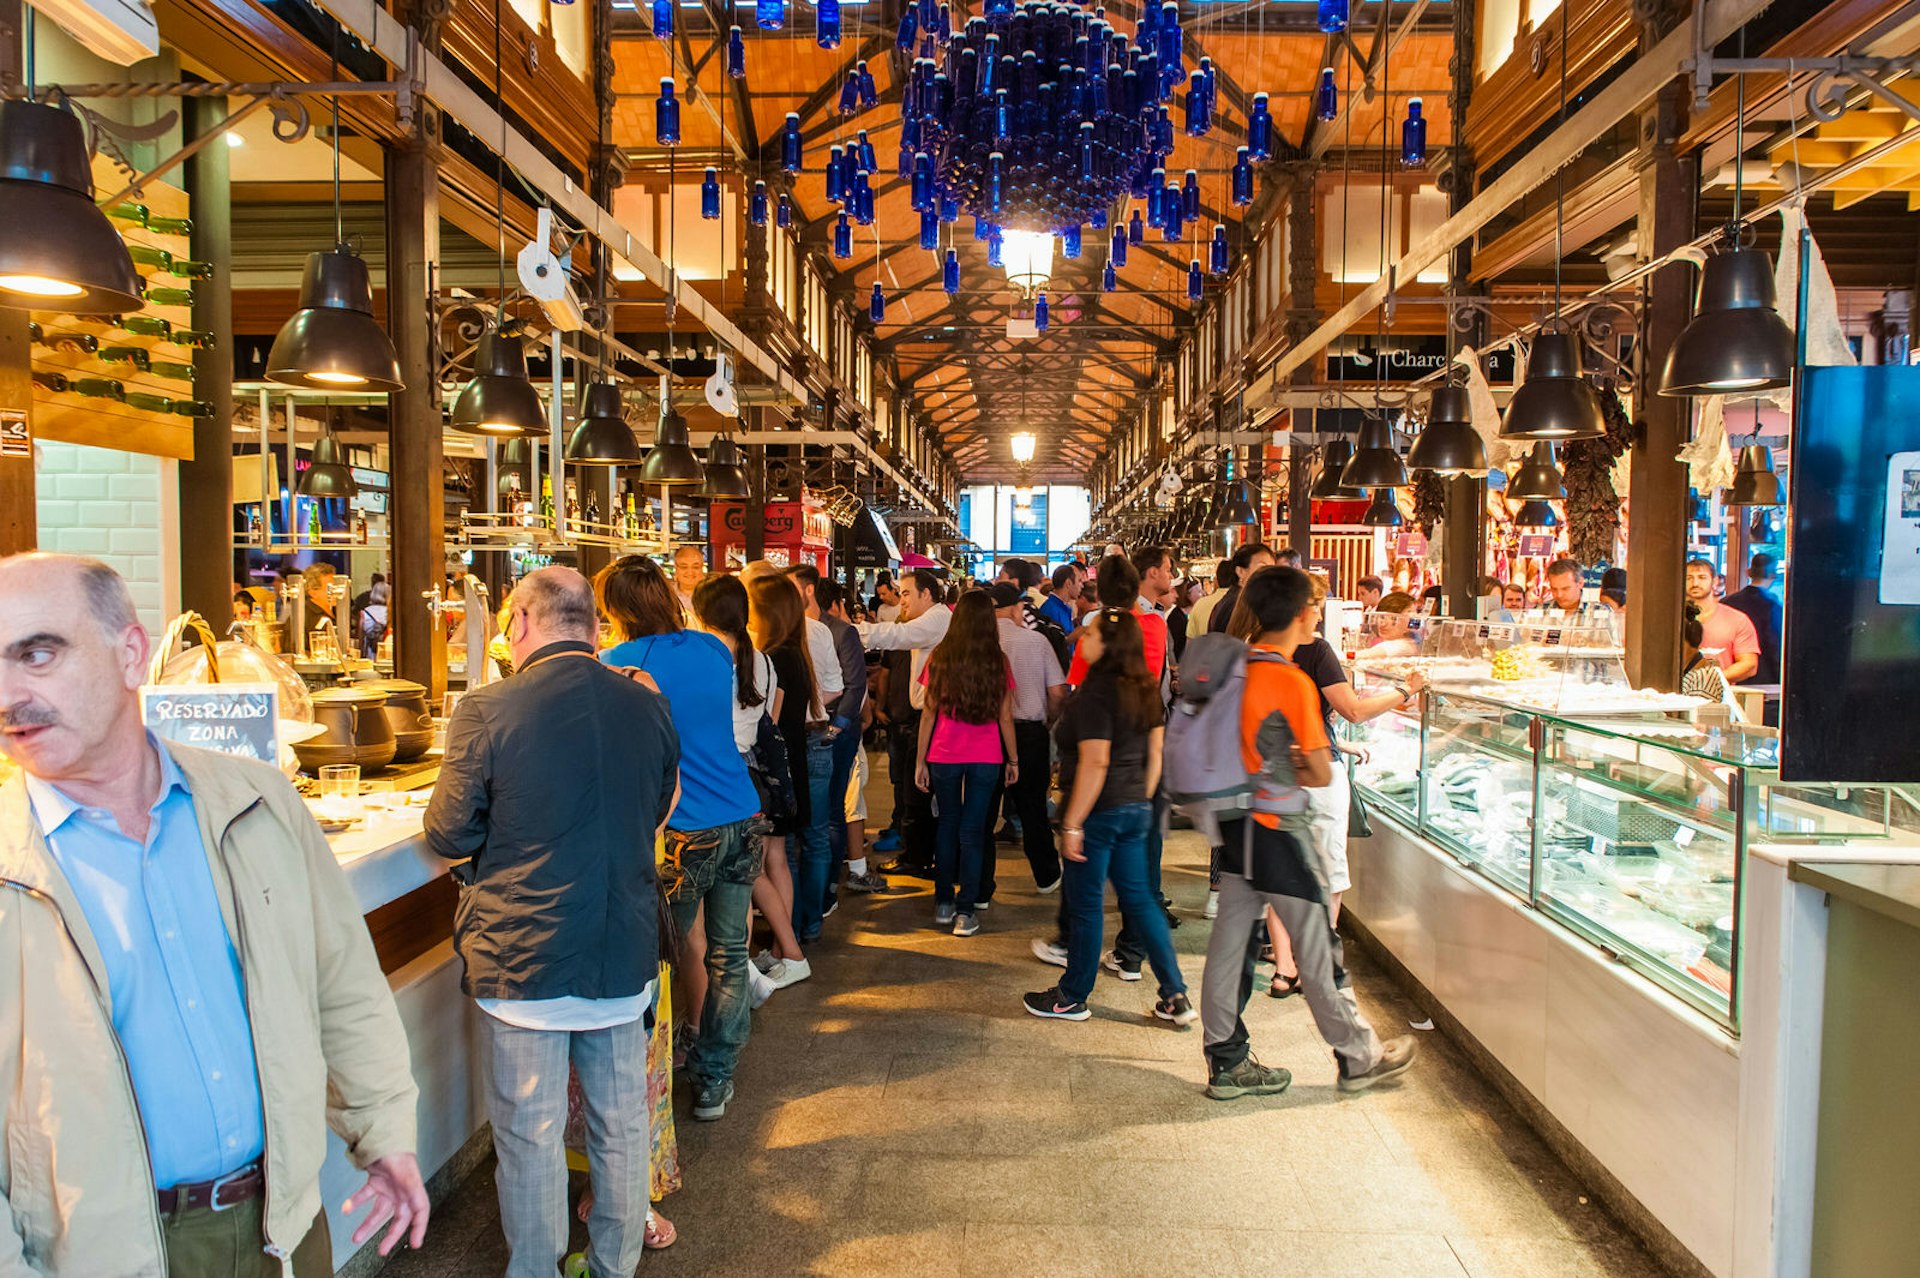 Crowds and stalls in Madrid's Mercado San Miguel